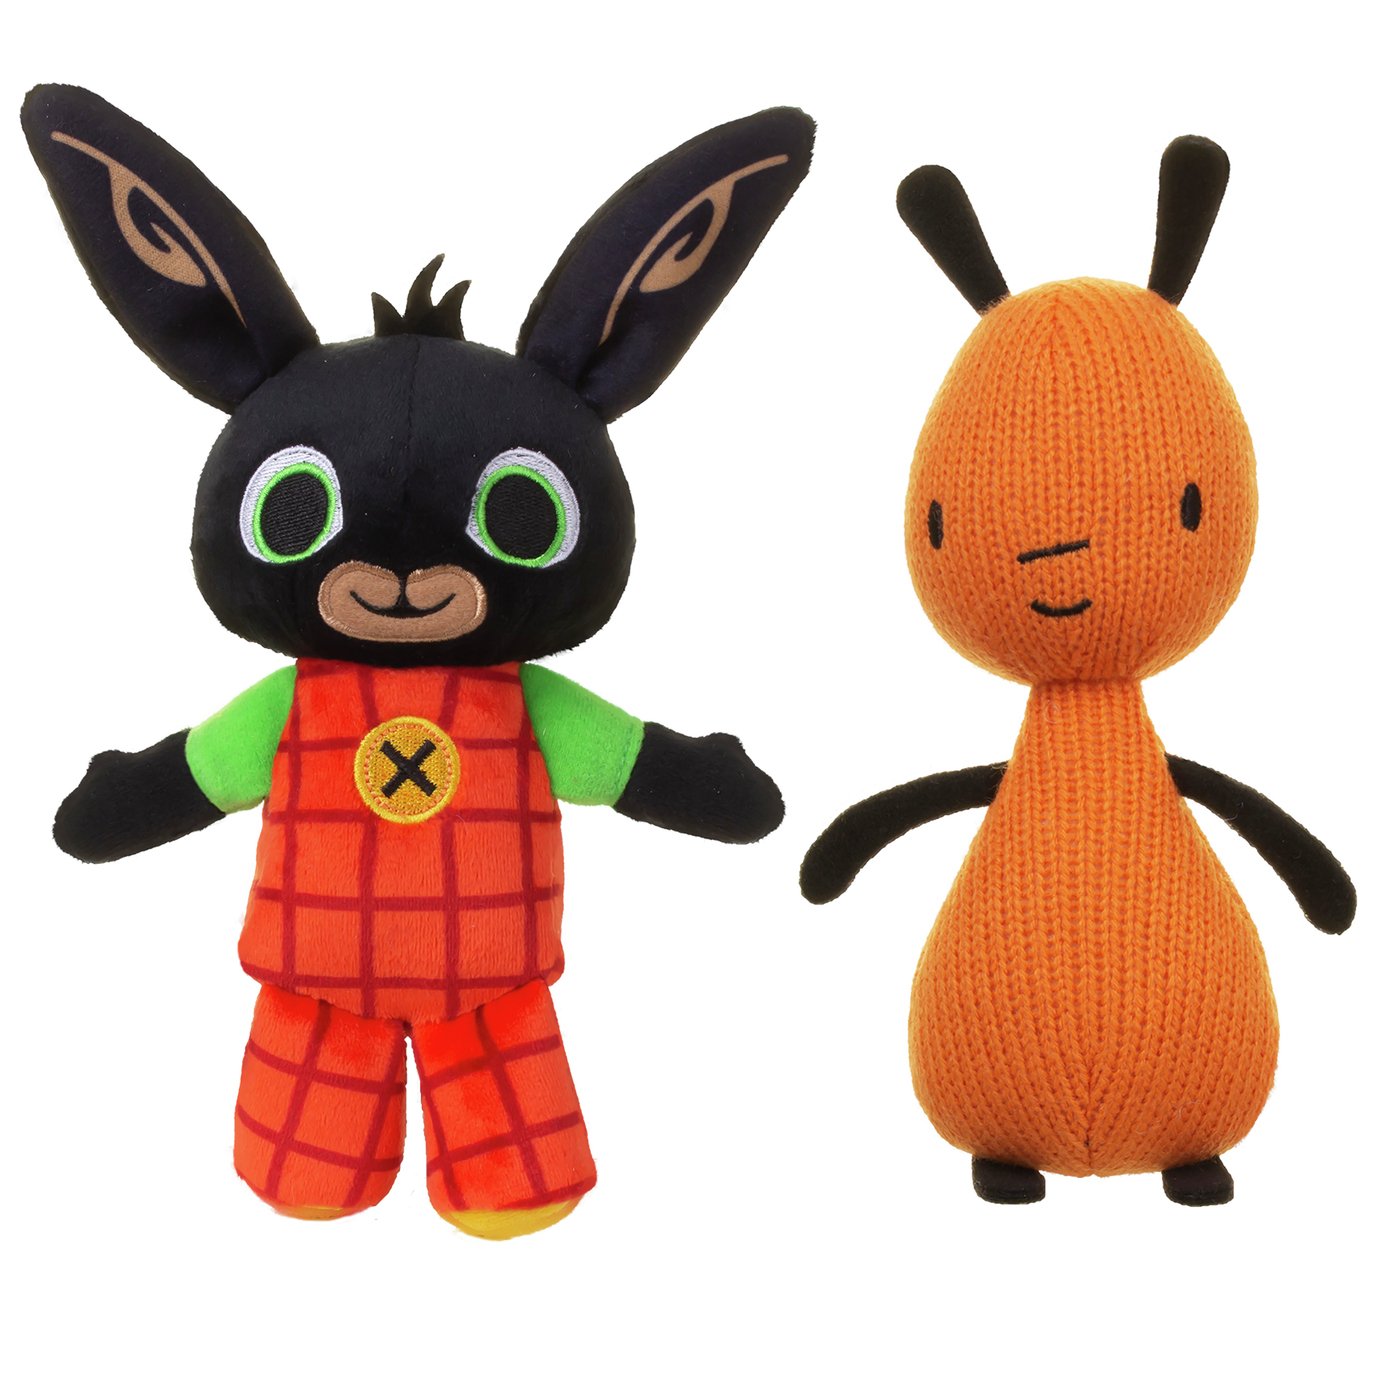 Bing and Flop Soft Toy Twin Pack Review